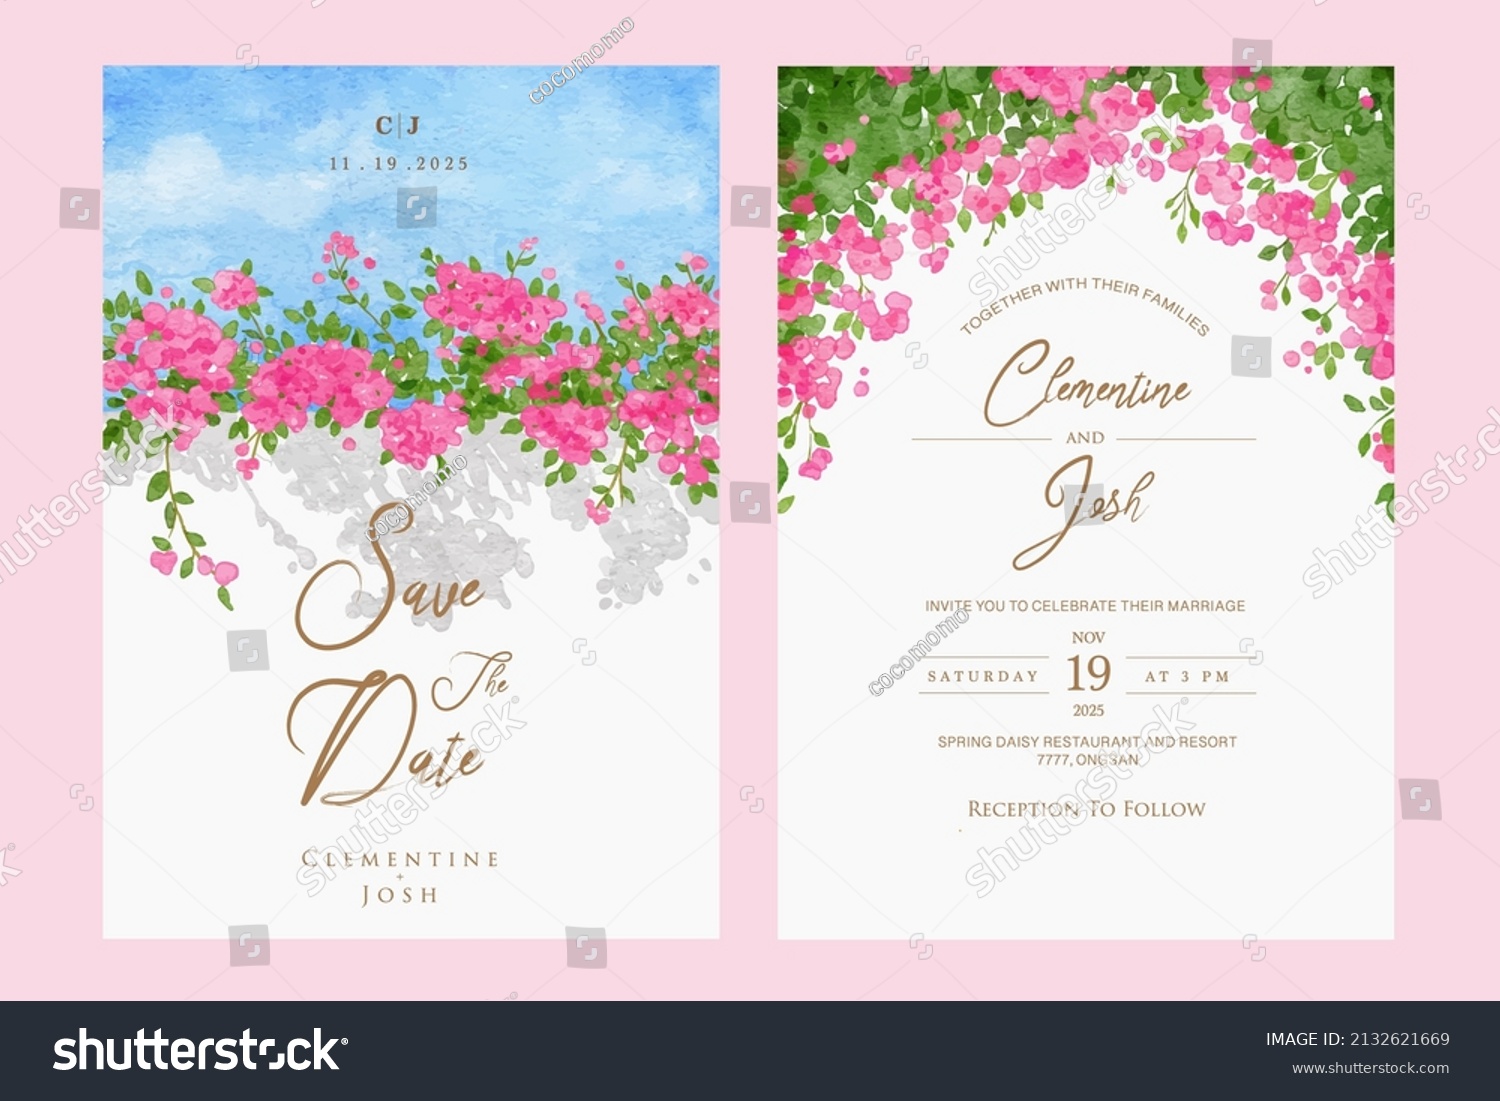 SVG of Set of wedding invitation with hand drawn watercolor spring pink bougainvillea flower background svg